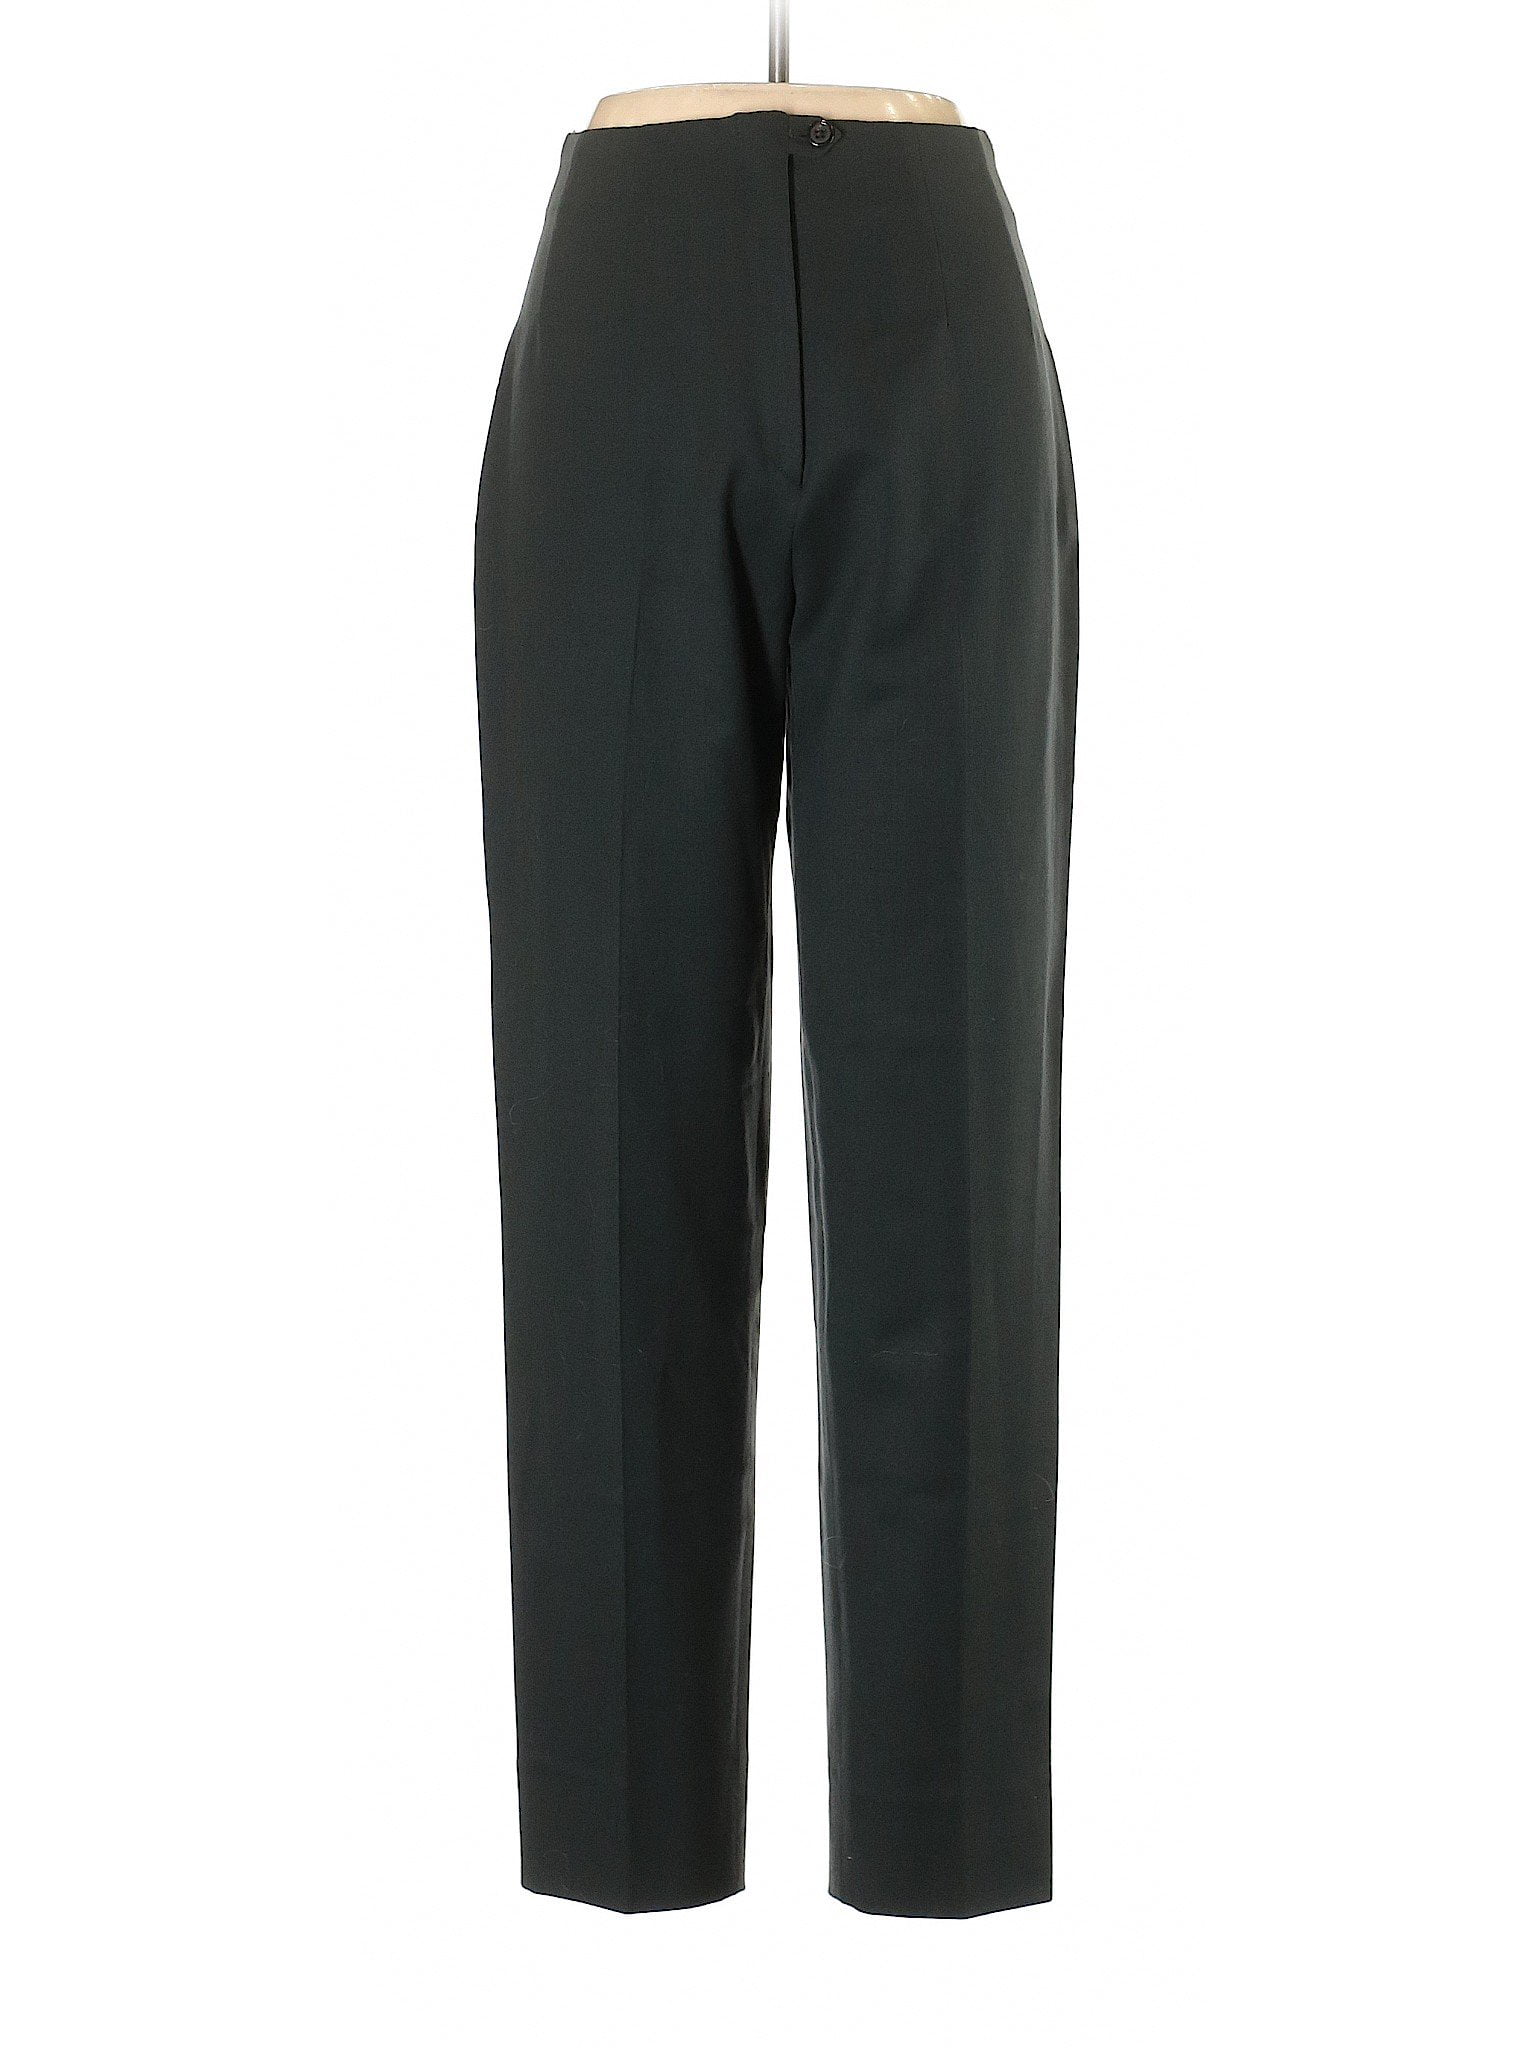 Piazza Sempione - Pre-Owned Piazza Sempione Women's Size 44 Wool Pants ...